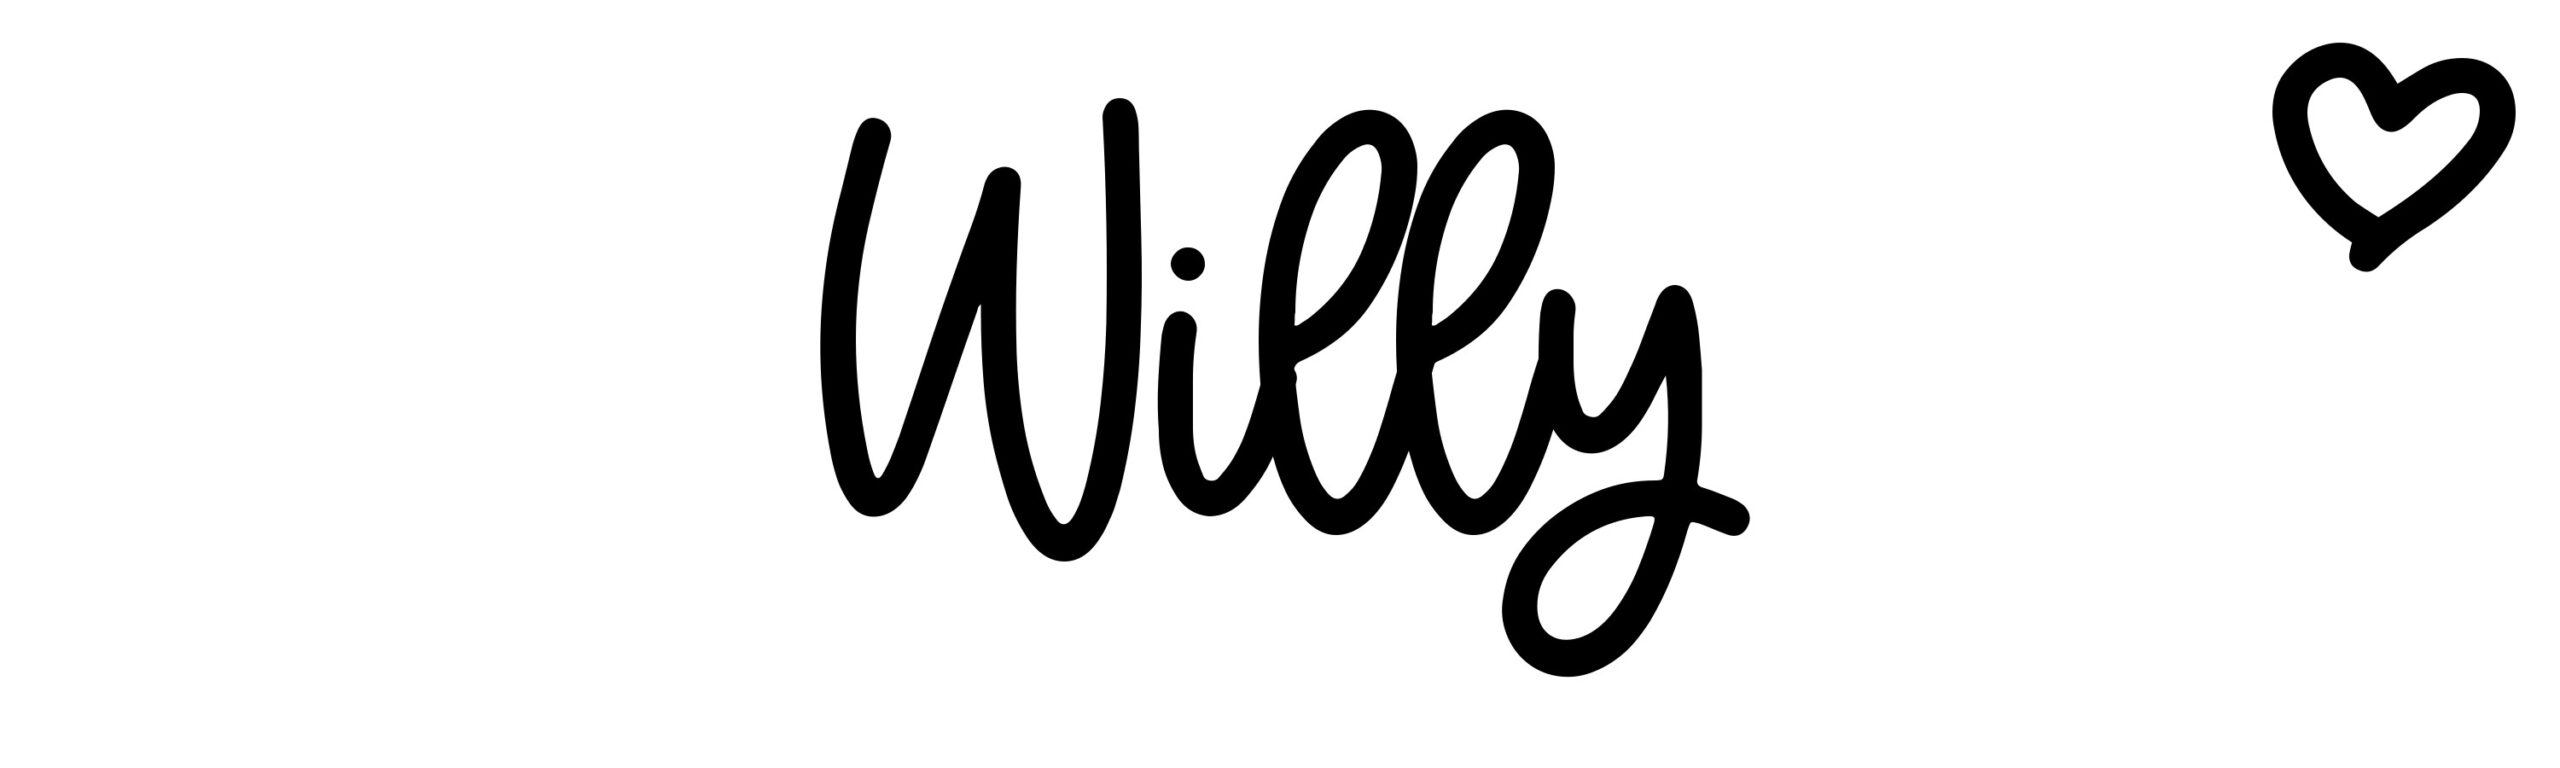 Willy - Name meaning, origin, variations and more